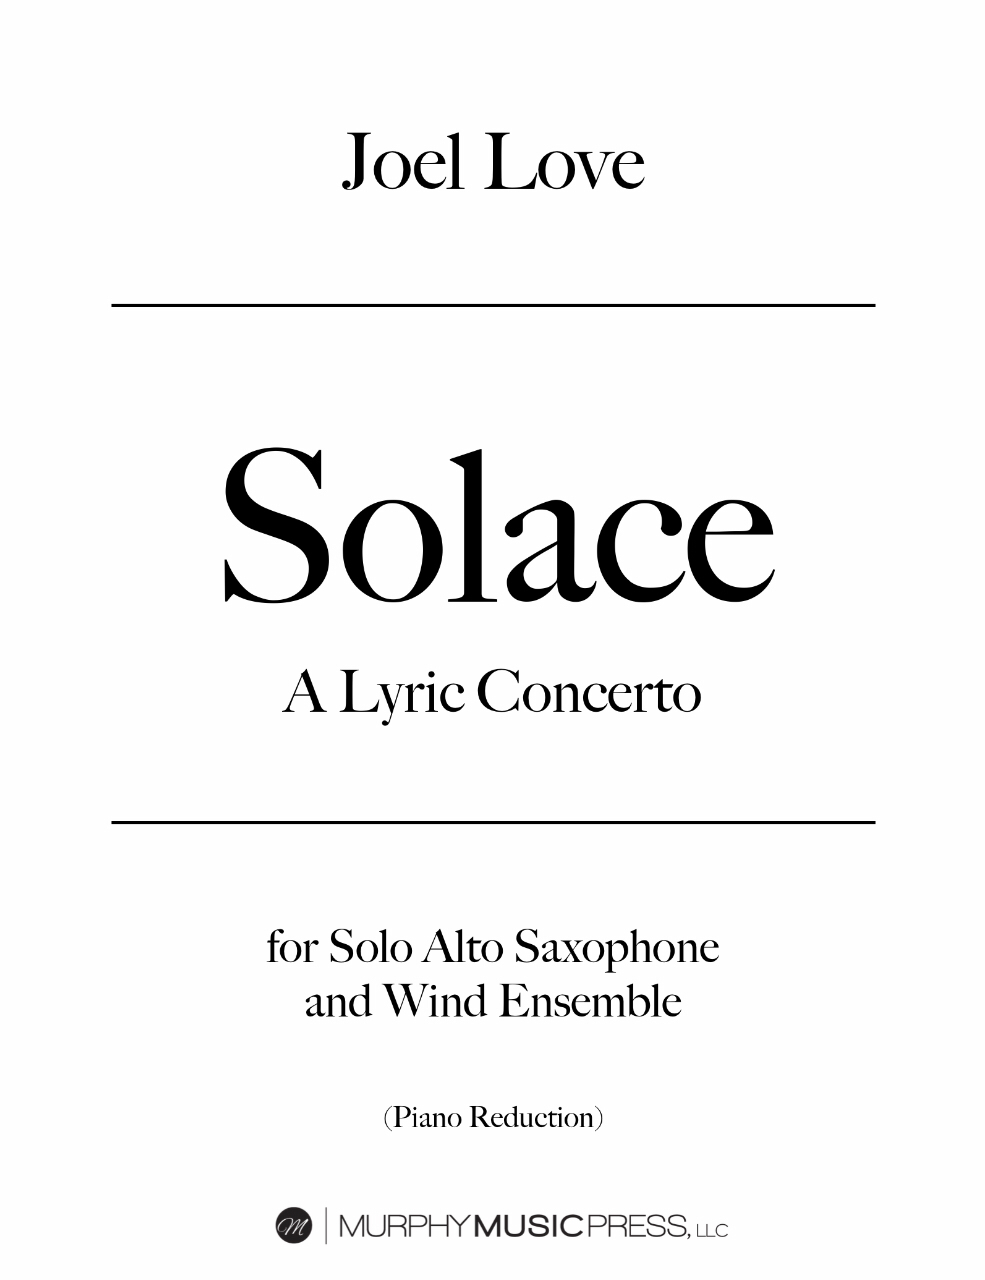 Solace (Piano Reduction) by Joel Love